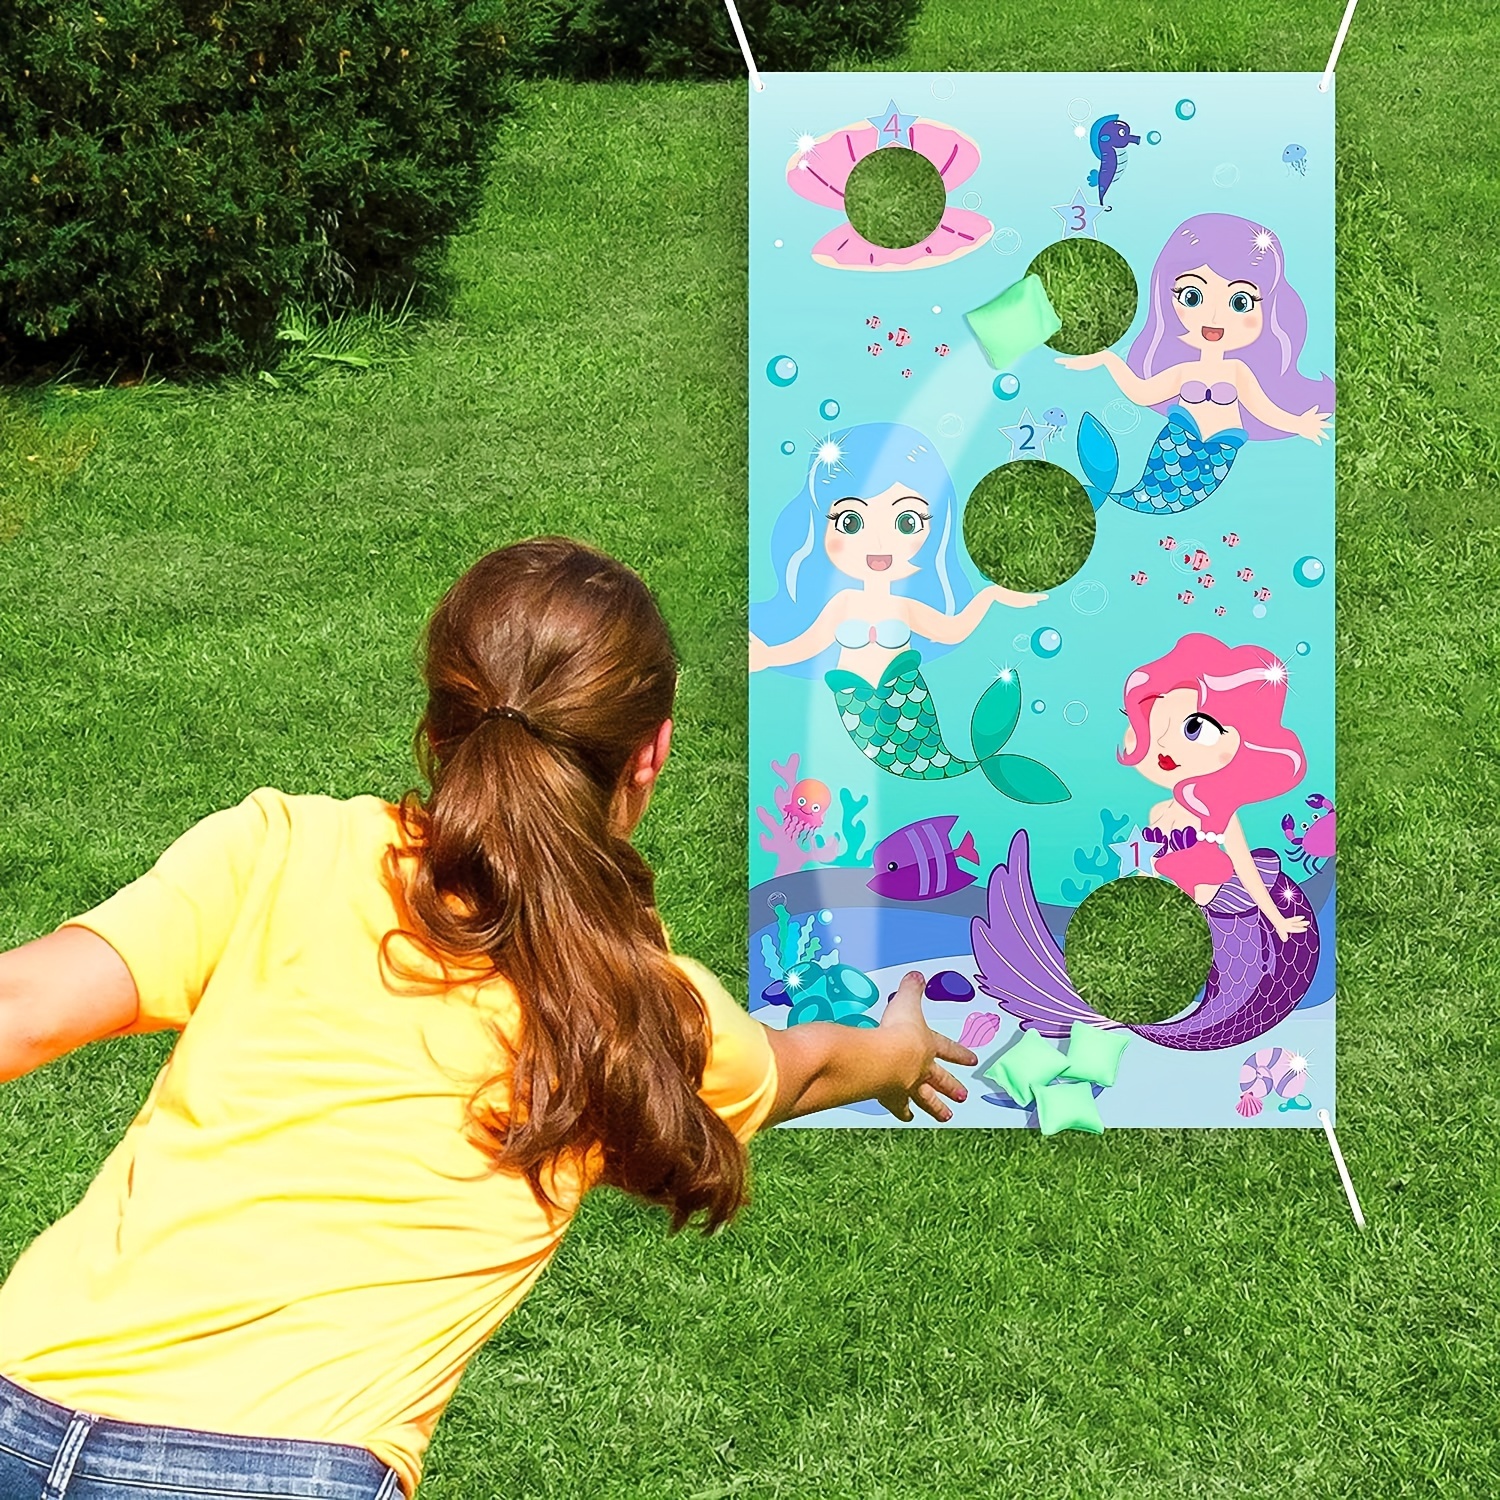 

Mermaid Throwing Game With 3 Bean Bags, Carnival Birthday Party Fun Game, Ocean Theme Party Decoration Mermaid Banner, Outdoor Garden Gifts And Supplies, Suitable For All Ages